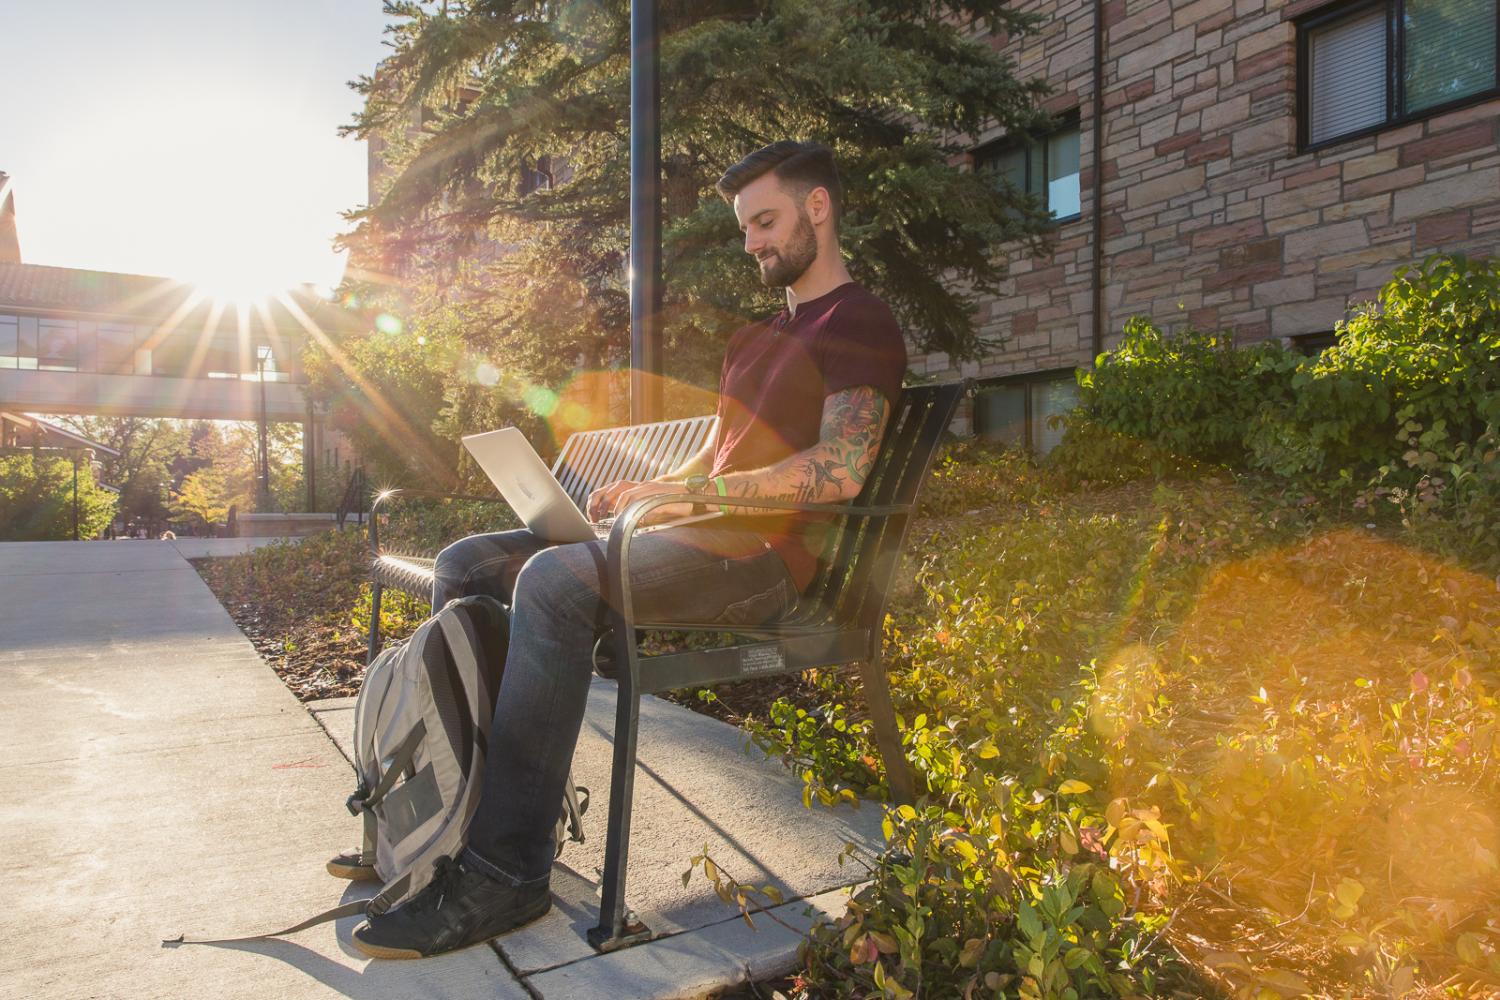 A student types on his laptop while sitting on a bench on campus in the evening light